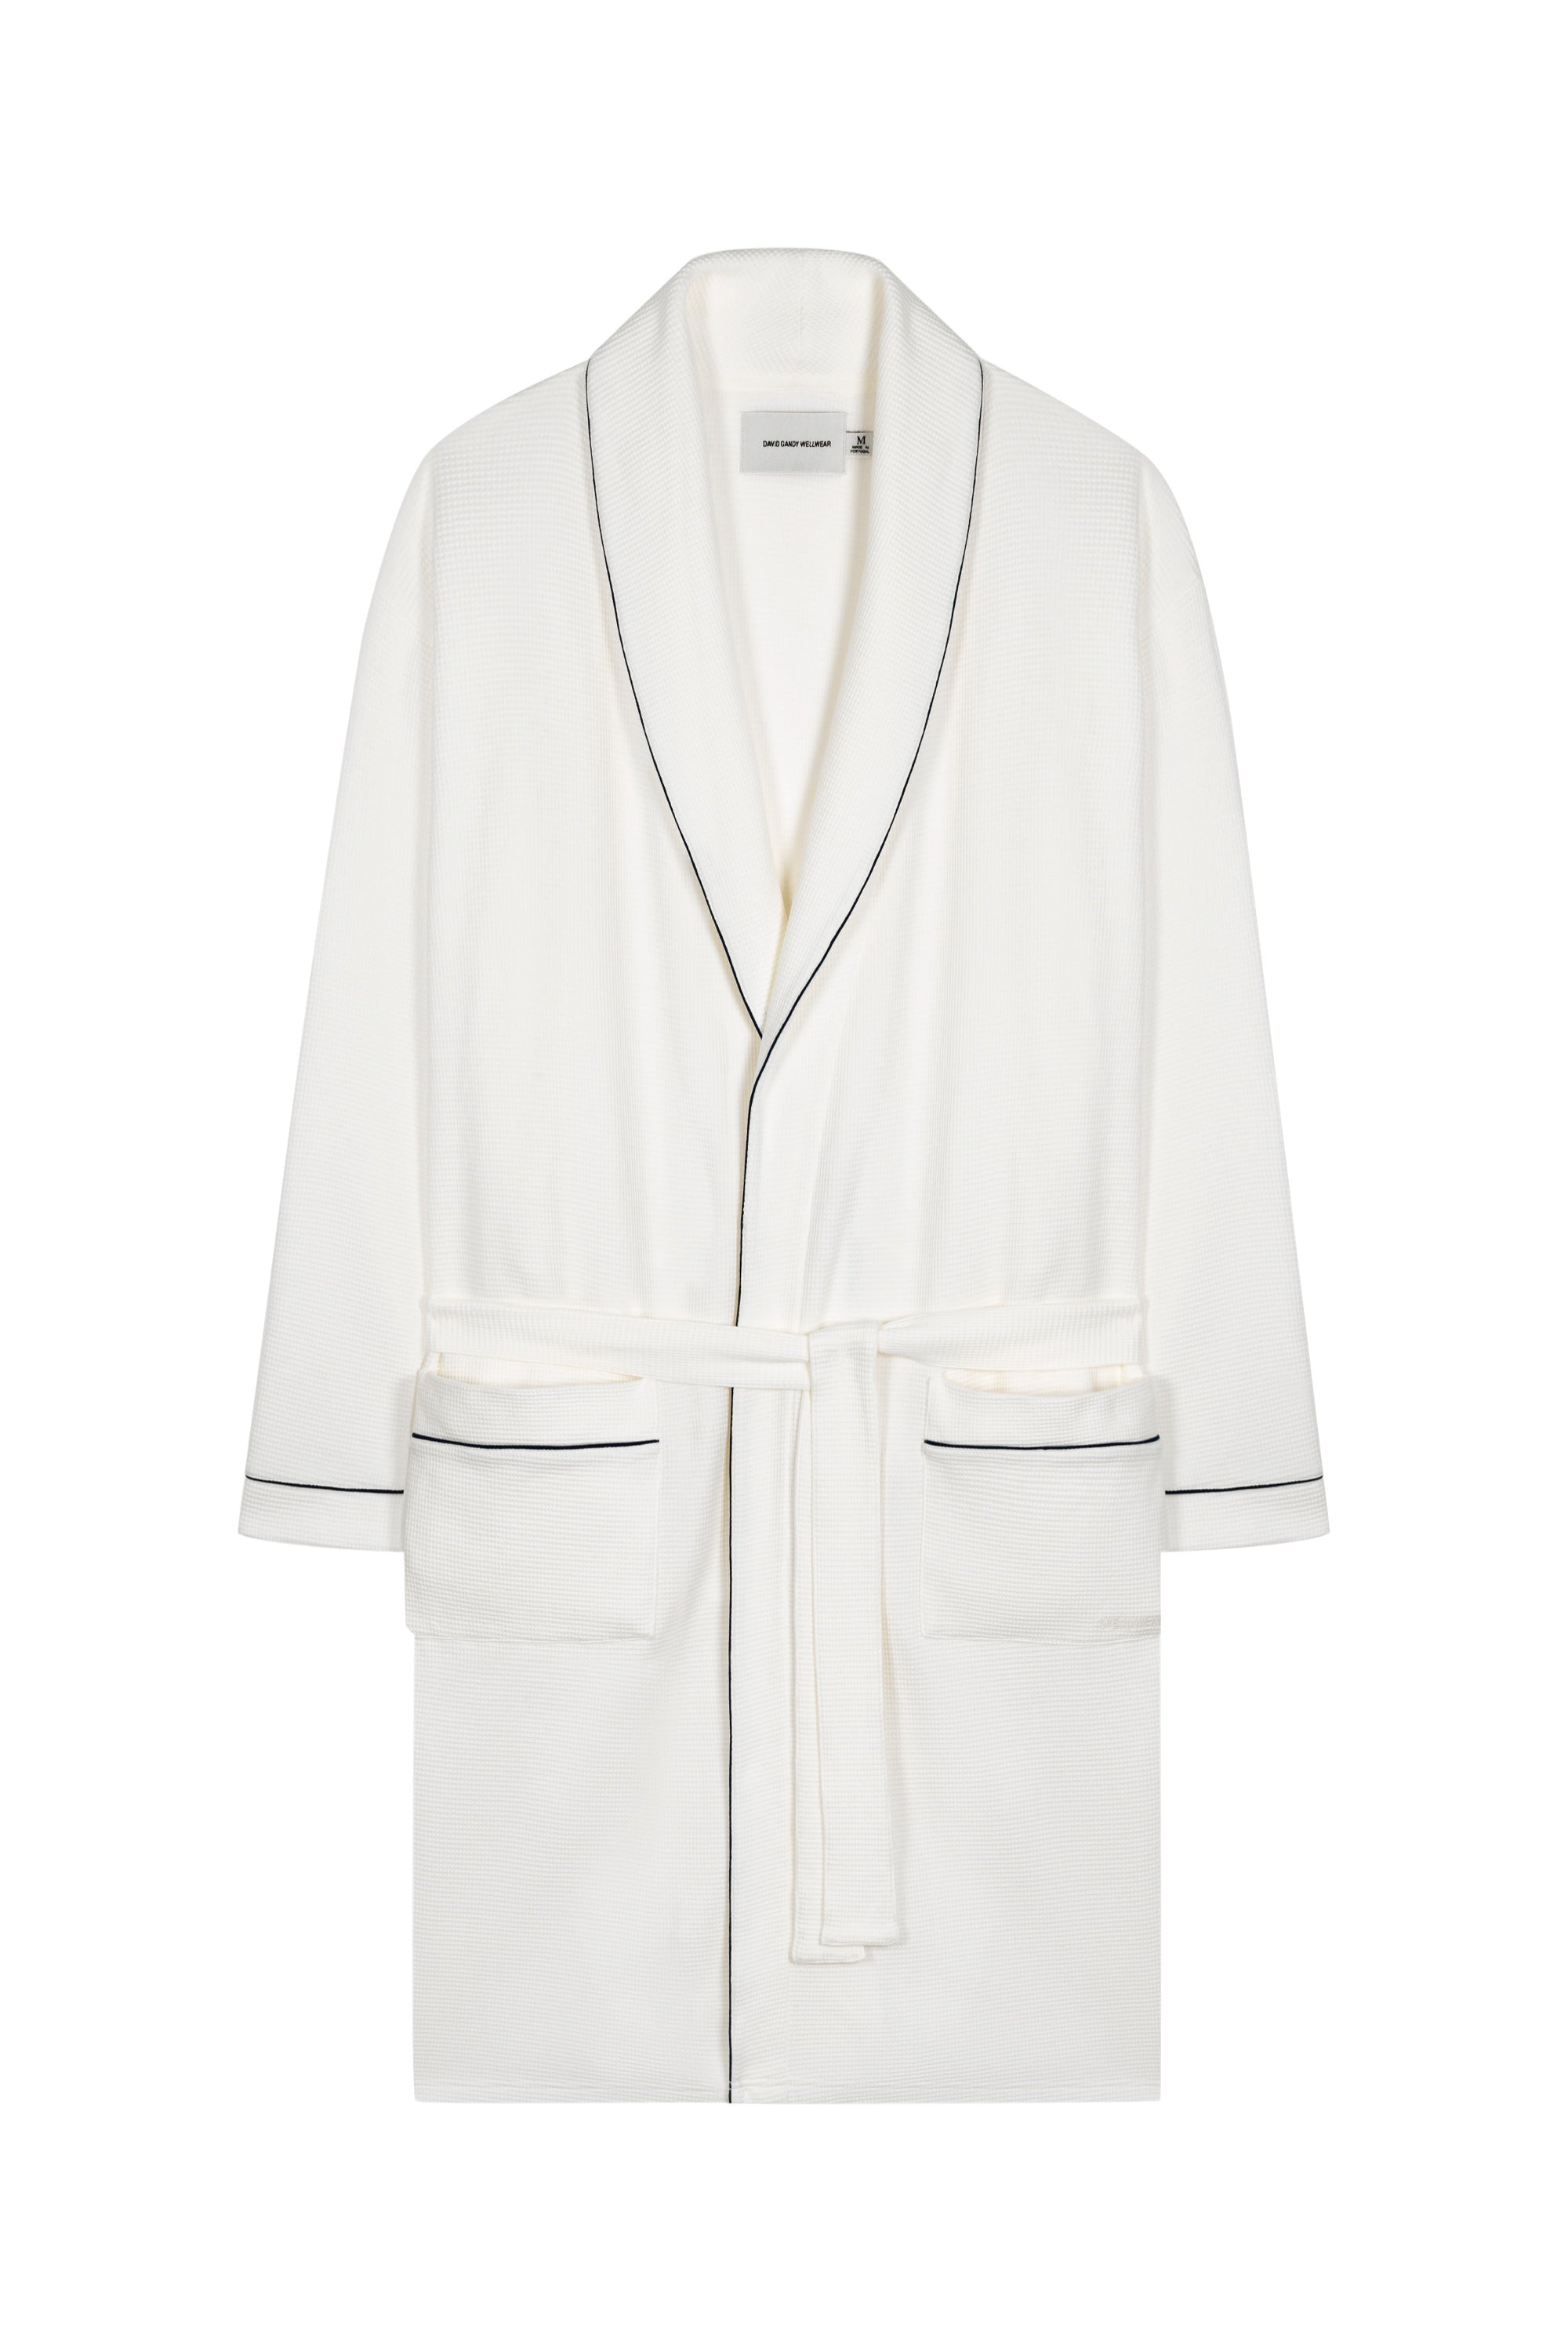 Unisex Waffle Dressing Gown - Bathrobe & Slippers, Guestroom - The Hotel  Space